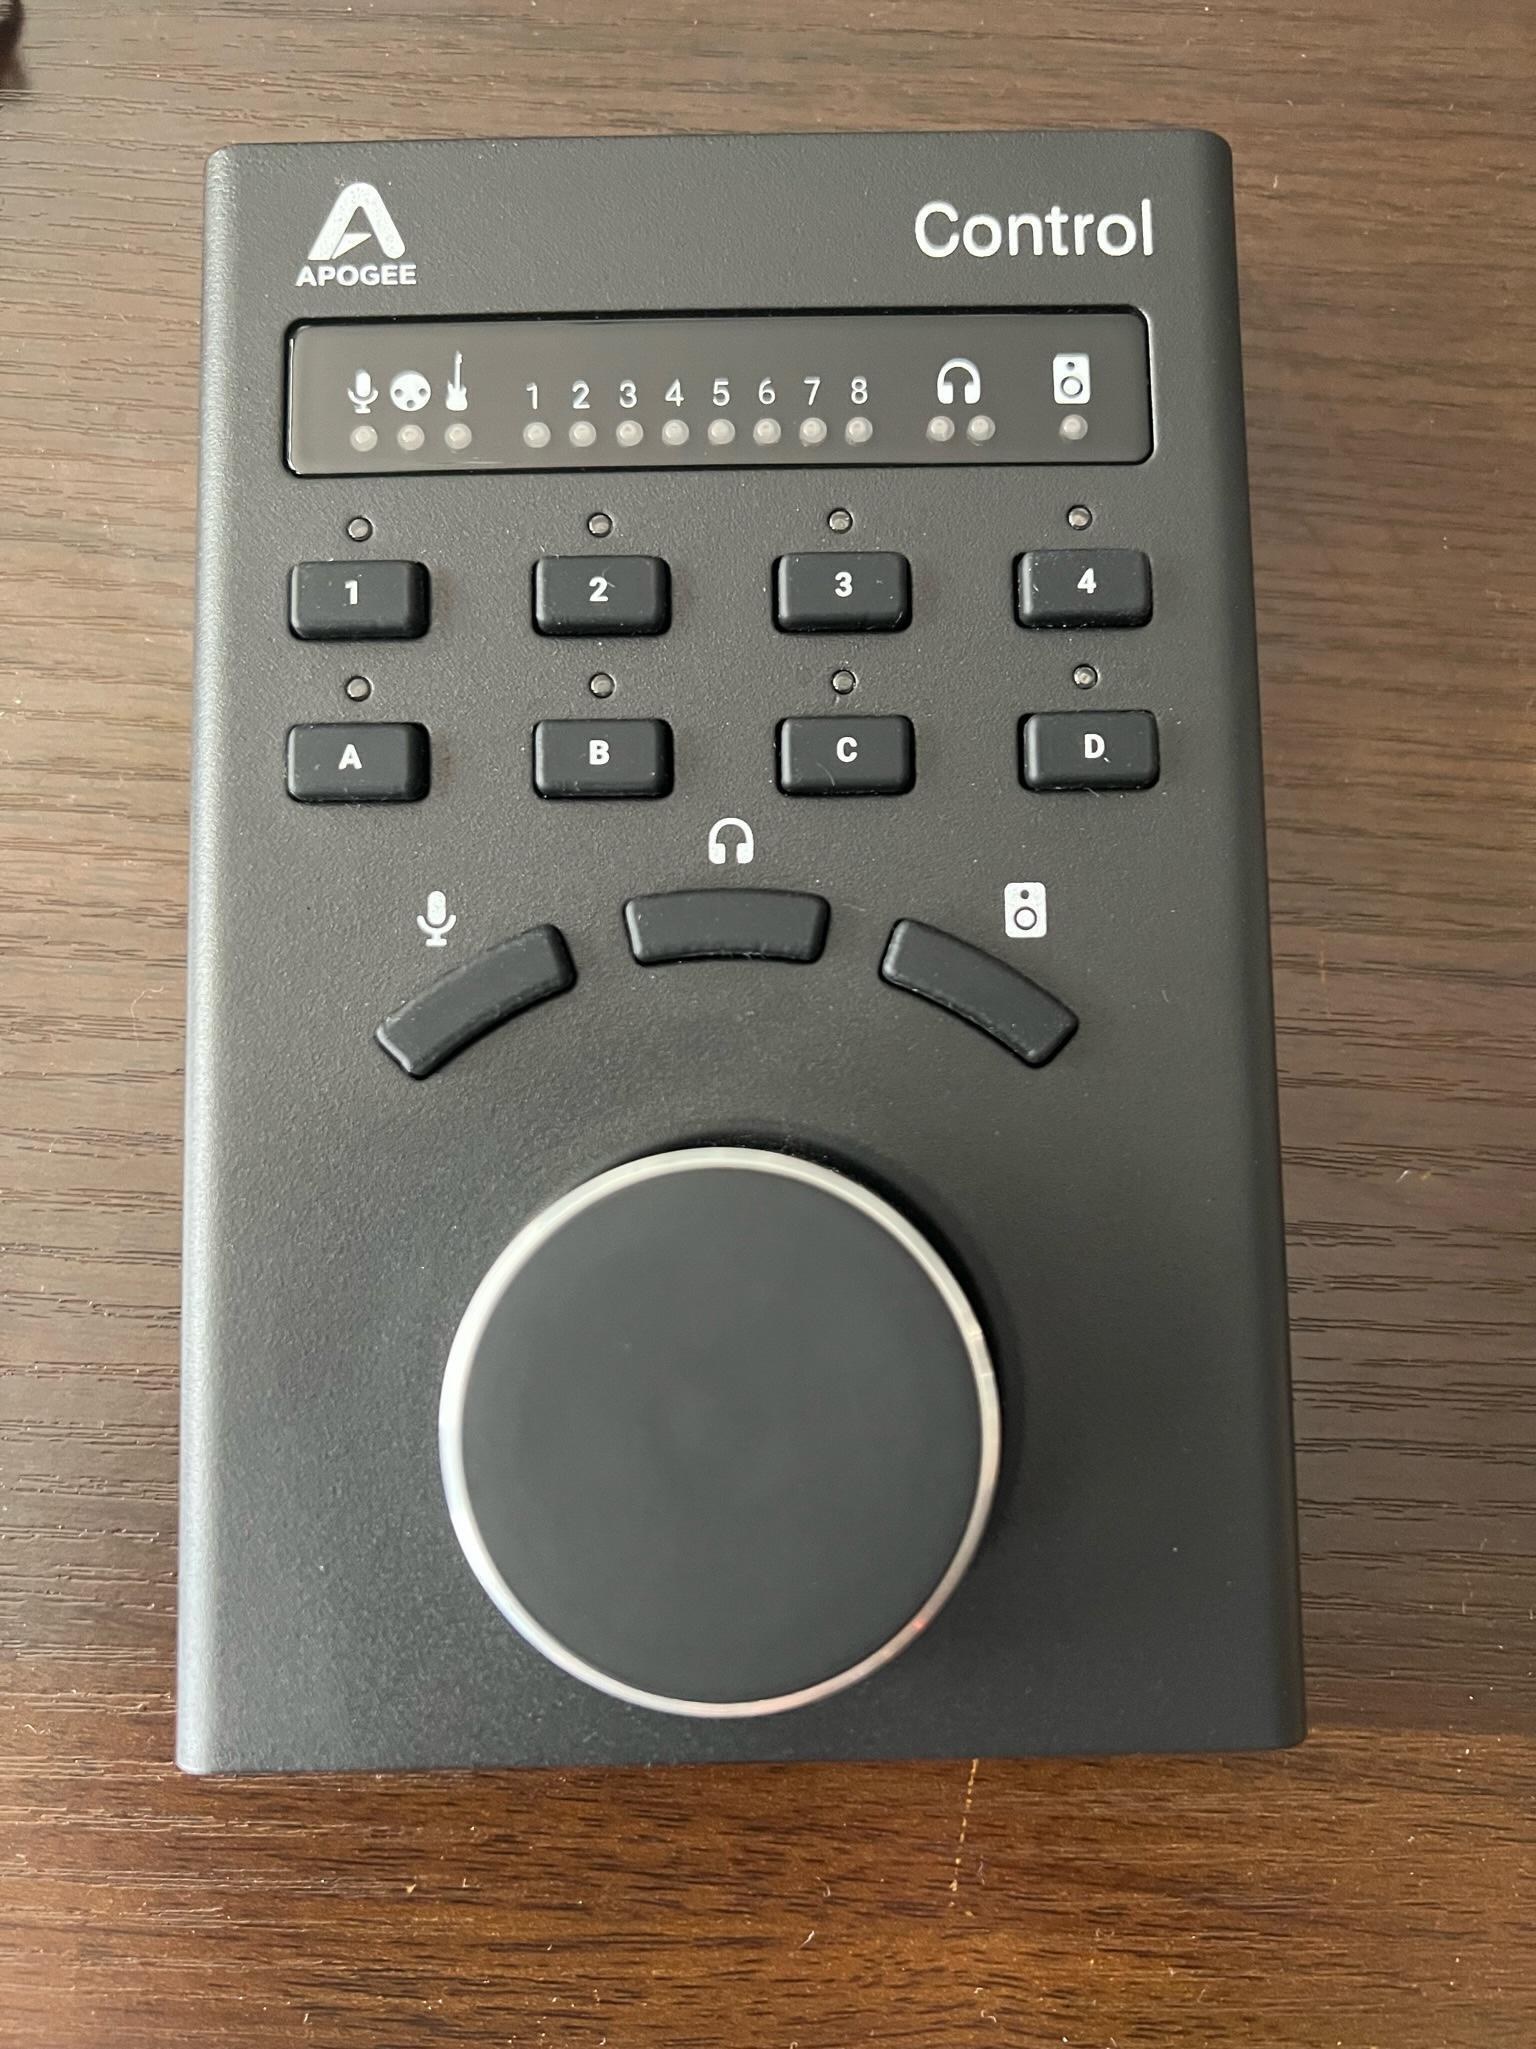 Used Apogee Control Hardware Remote for - Sweetwater's Gear Exchange